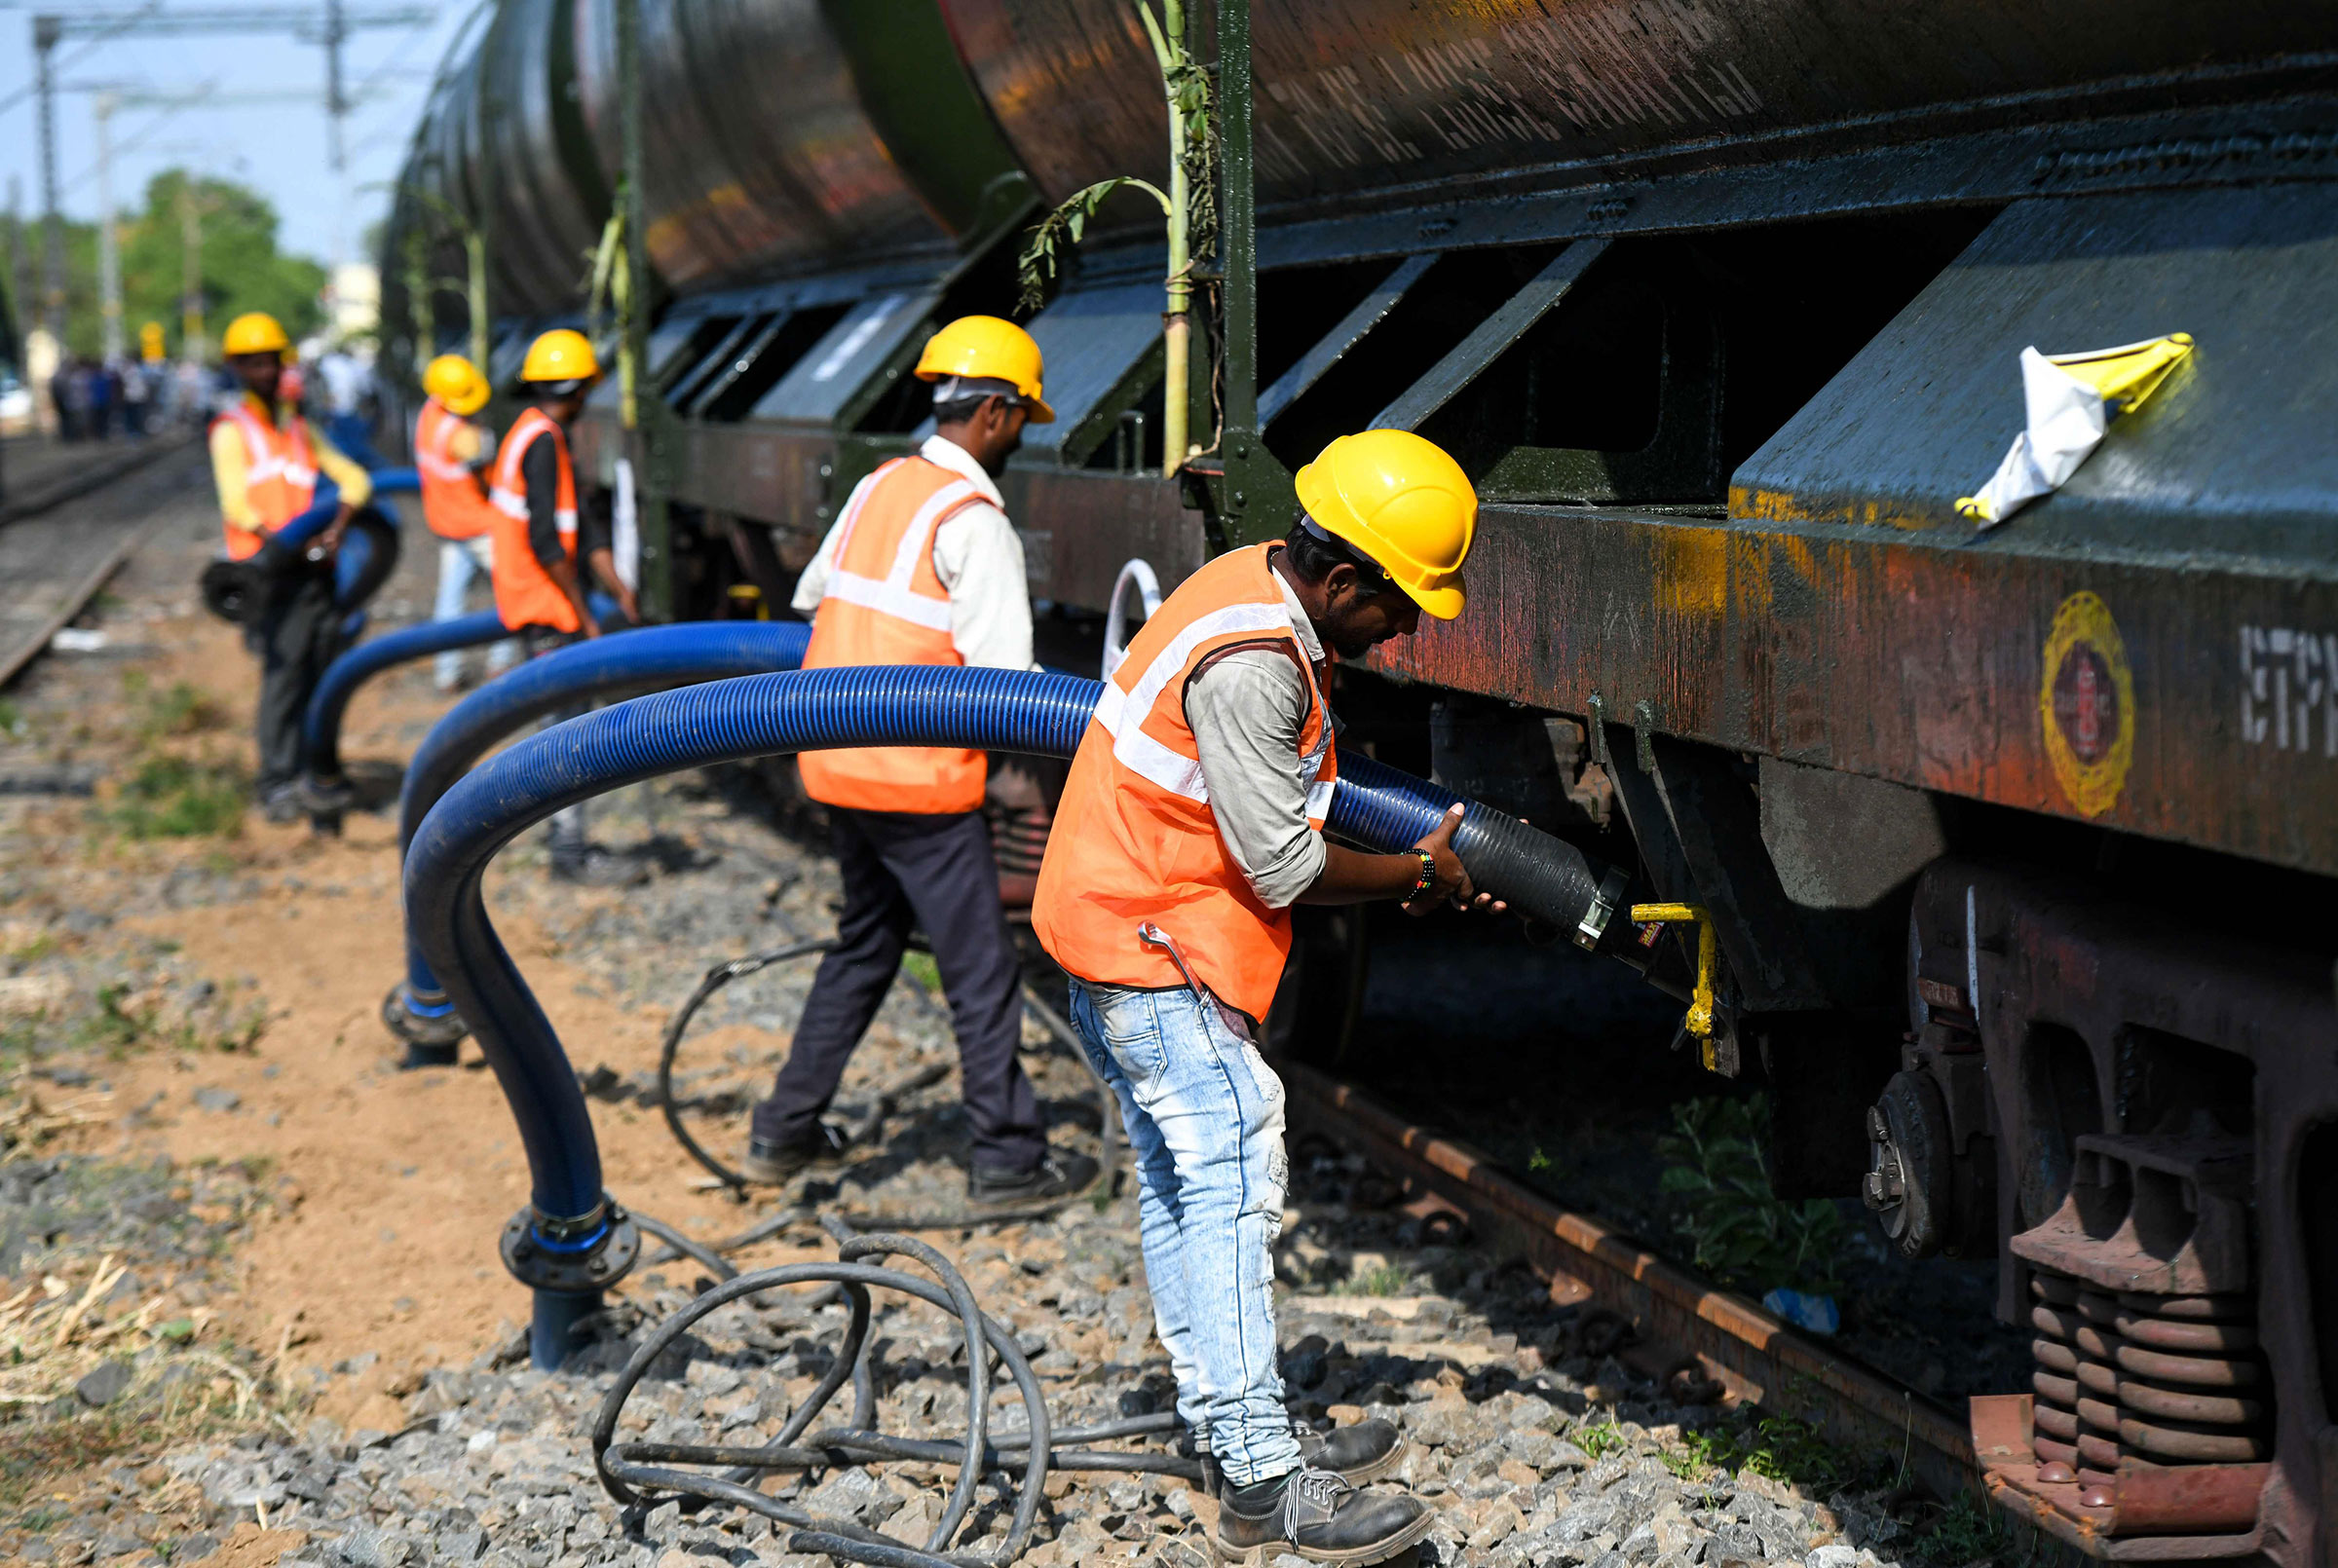 Indian laborers connect pipes to collect water from a train carrying liters of water at a railway station in Chennai on July 12.